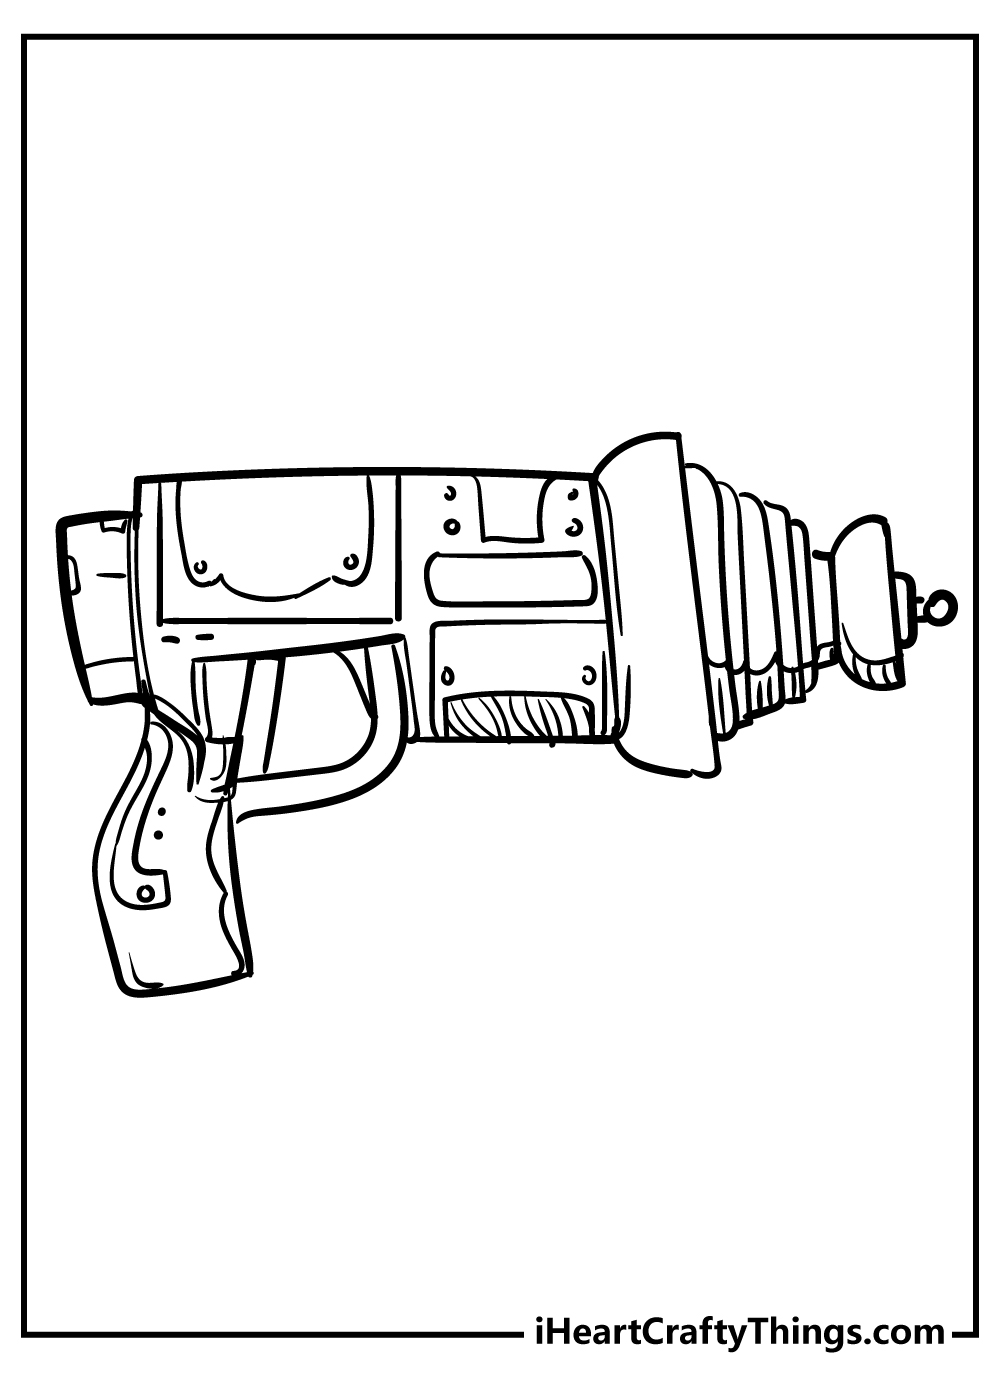 Nerf Gun Coloring Pages for preschoolers free printable